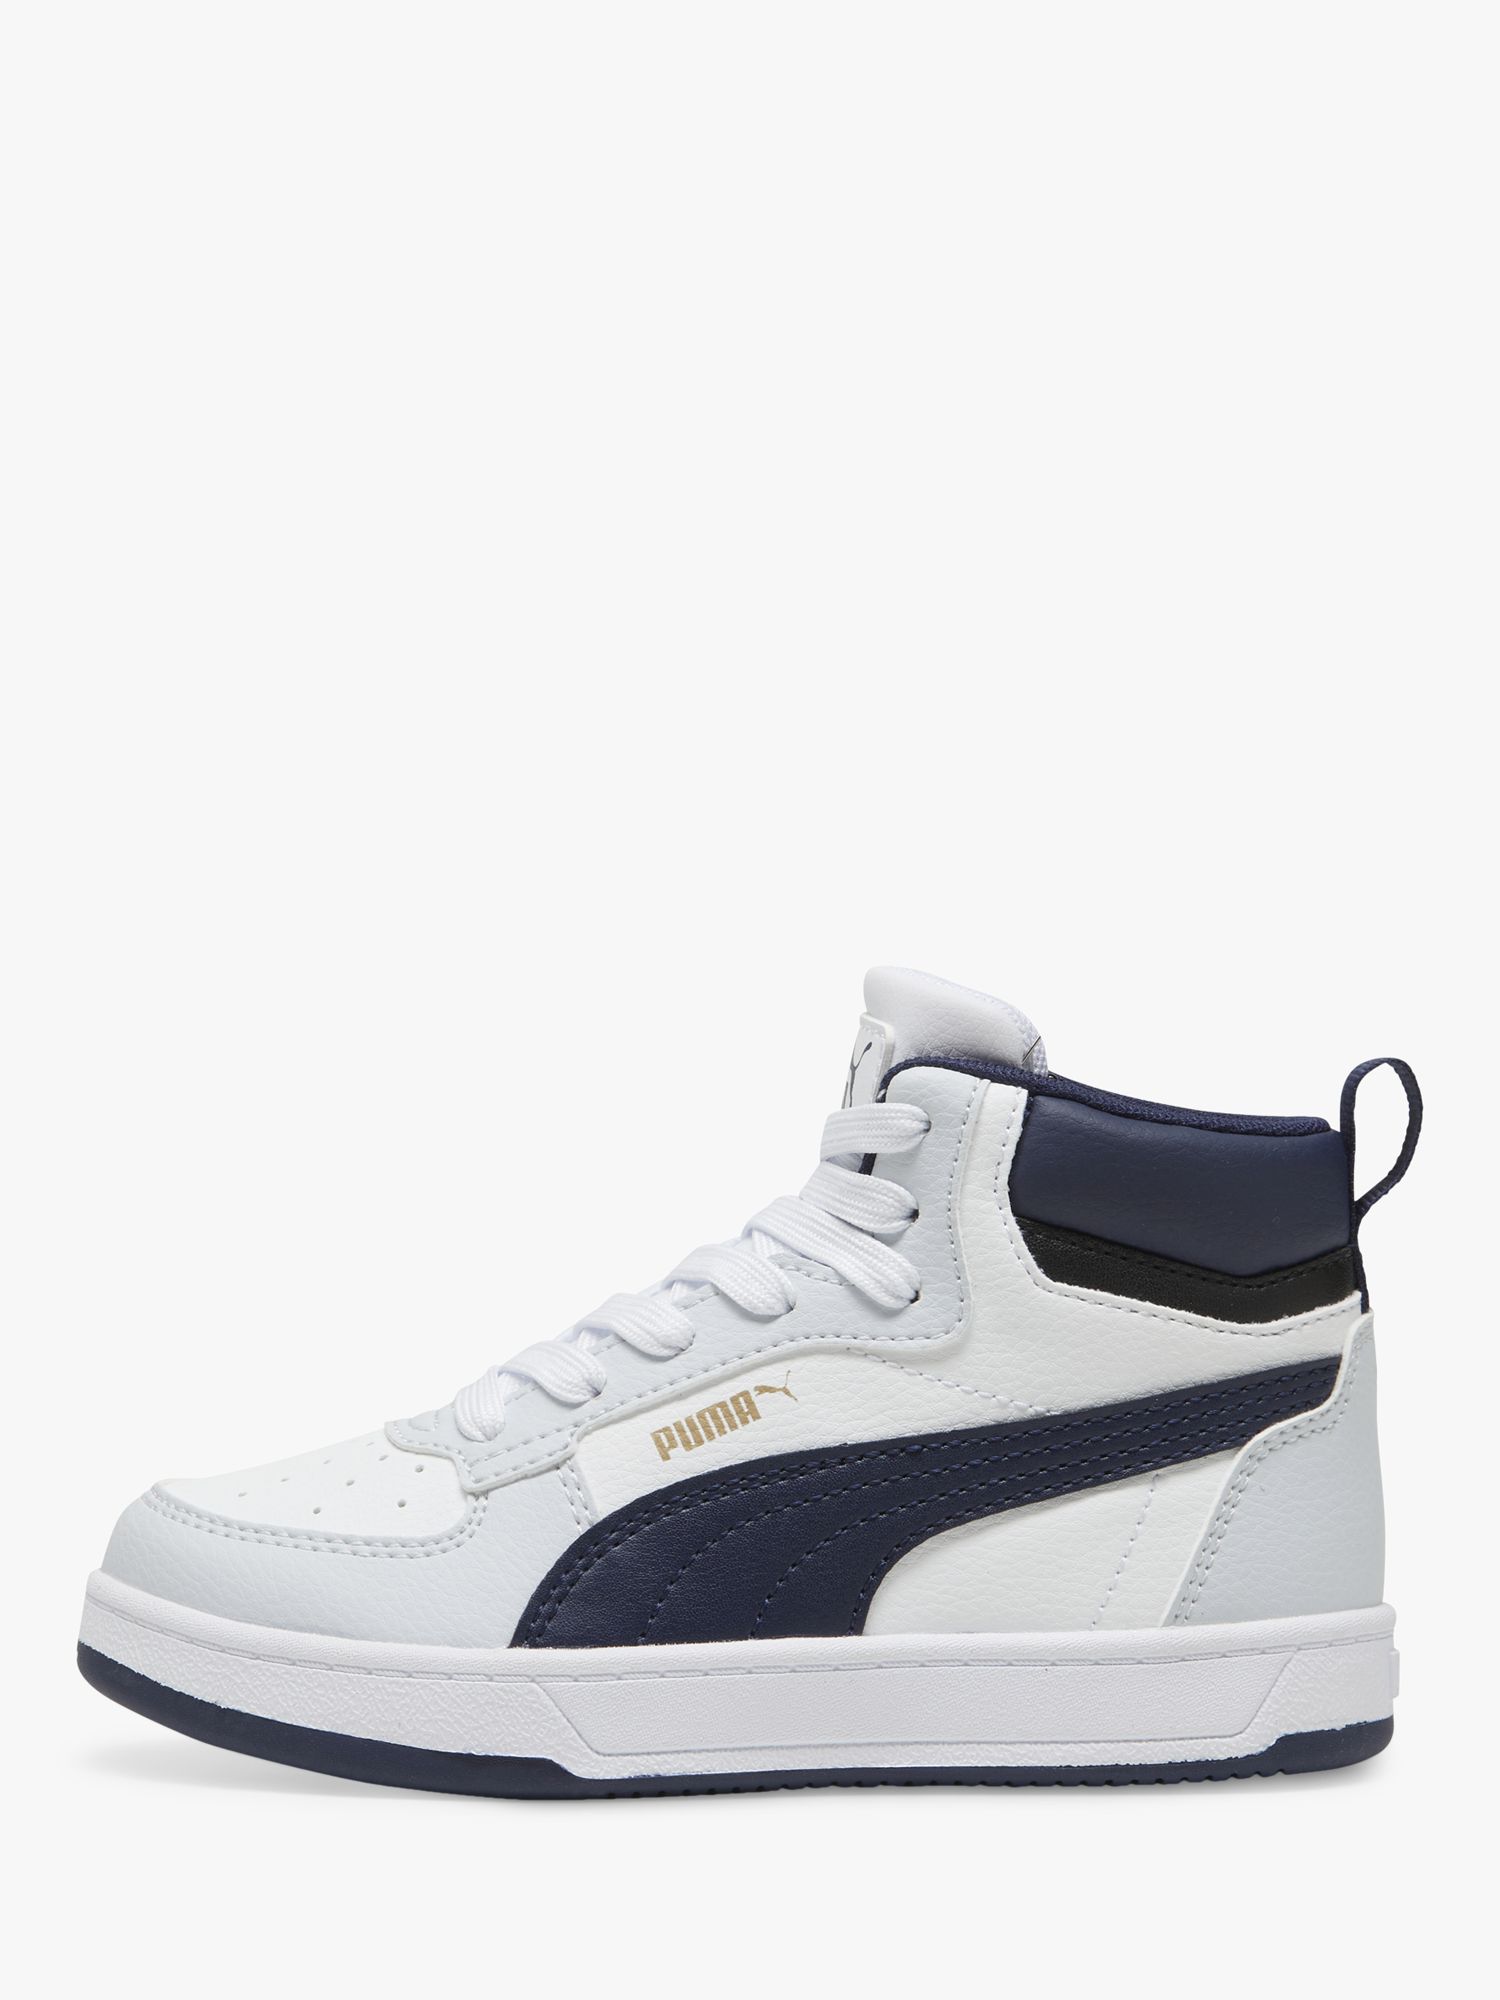 PUMA Kids' Caven 2.0 Mid Trainers, White/Navy, 2